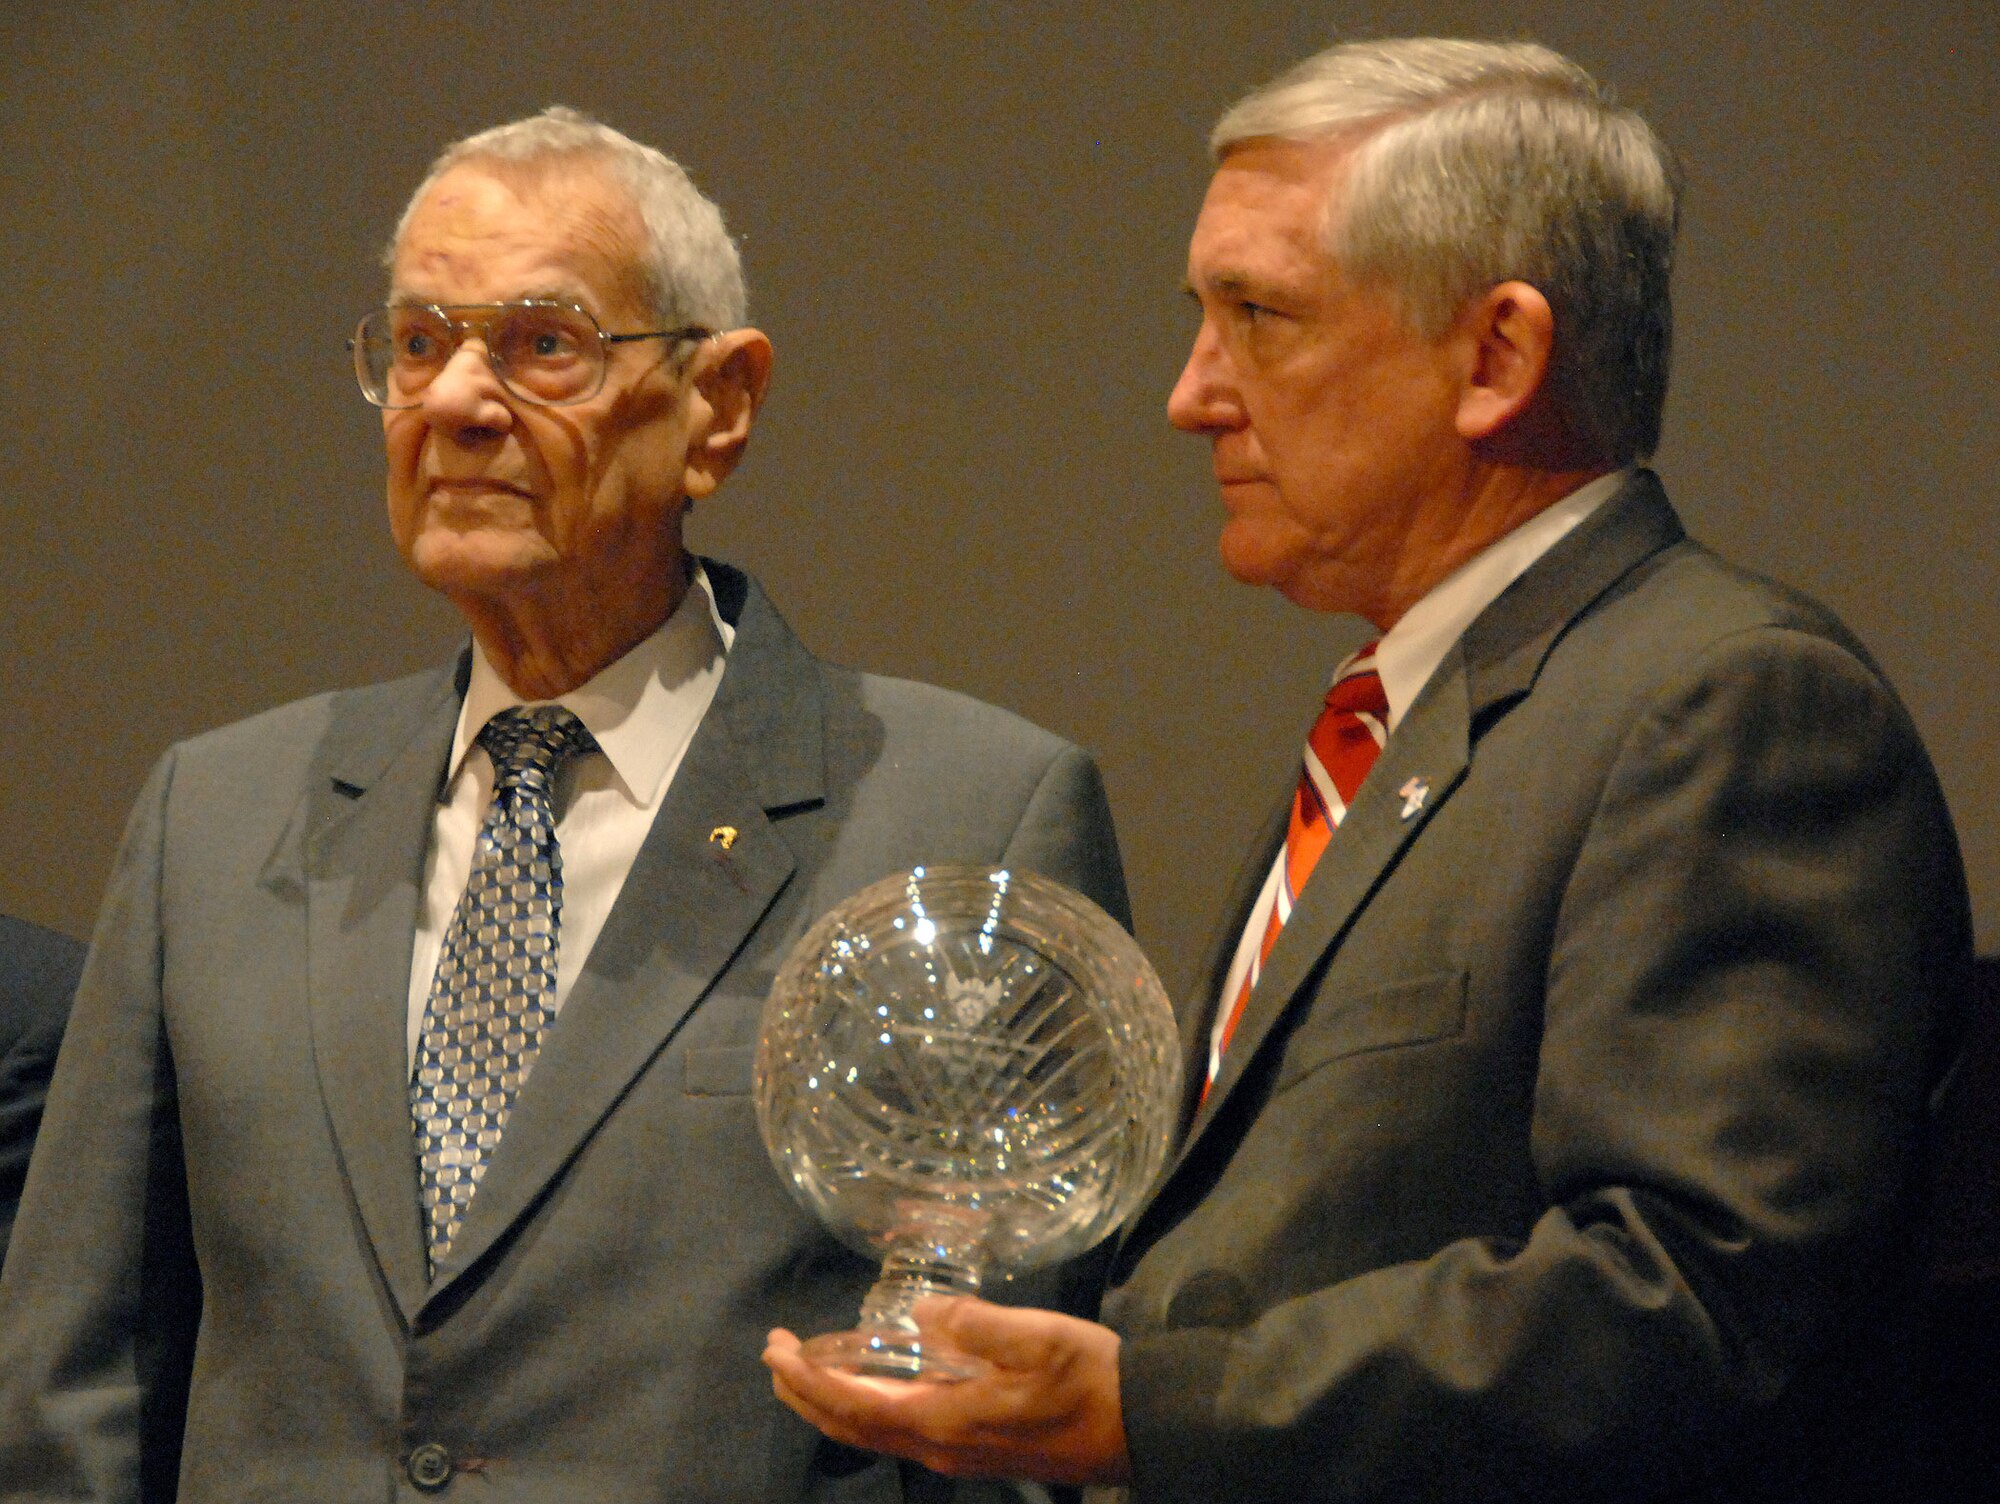 Retired Chief Master Sgt. of the Air Force Paul Wesley Airey receives the Air Force Association's Lifetime Achievement award from AFA's Chairman of the Board Robert Largent during a Nov. 20 ceremony at Maxwell-Gunter's Senior NCO Academy in Alabama. Chief Airey was the first chief master sergeant of the Air Force, and is the first enlisted member to receive the AFA award. (U.S. Air Force photo/Master Sgt. Scott Moorman)